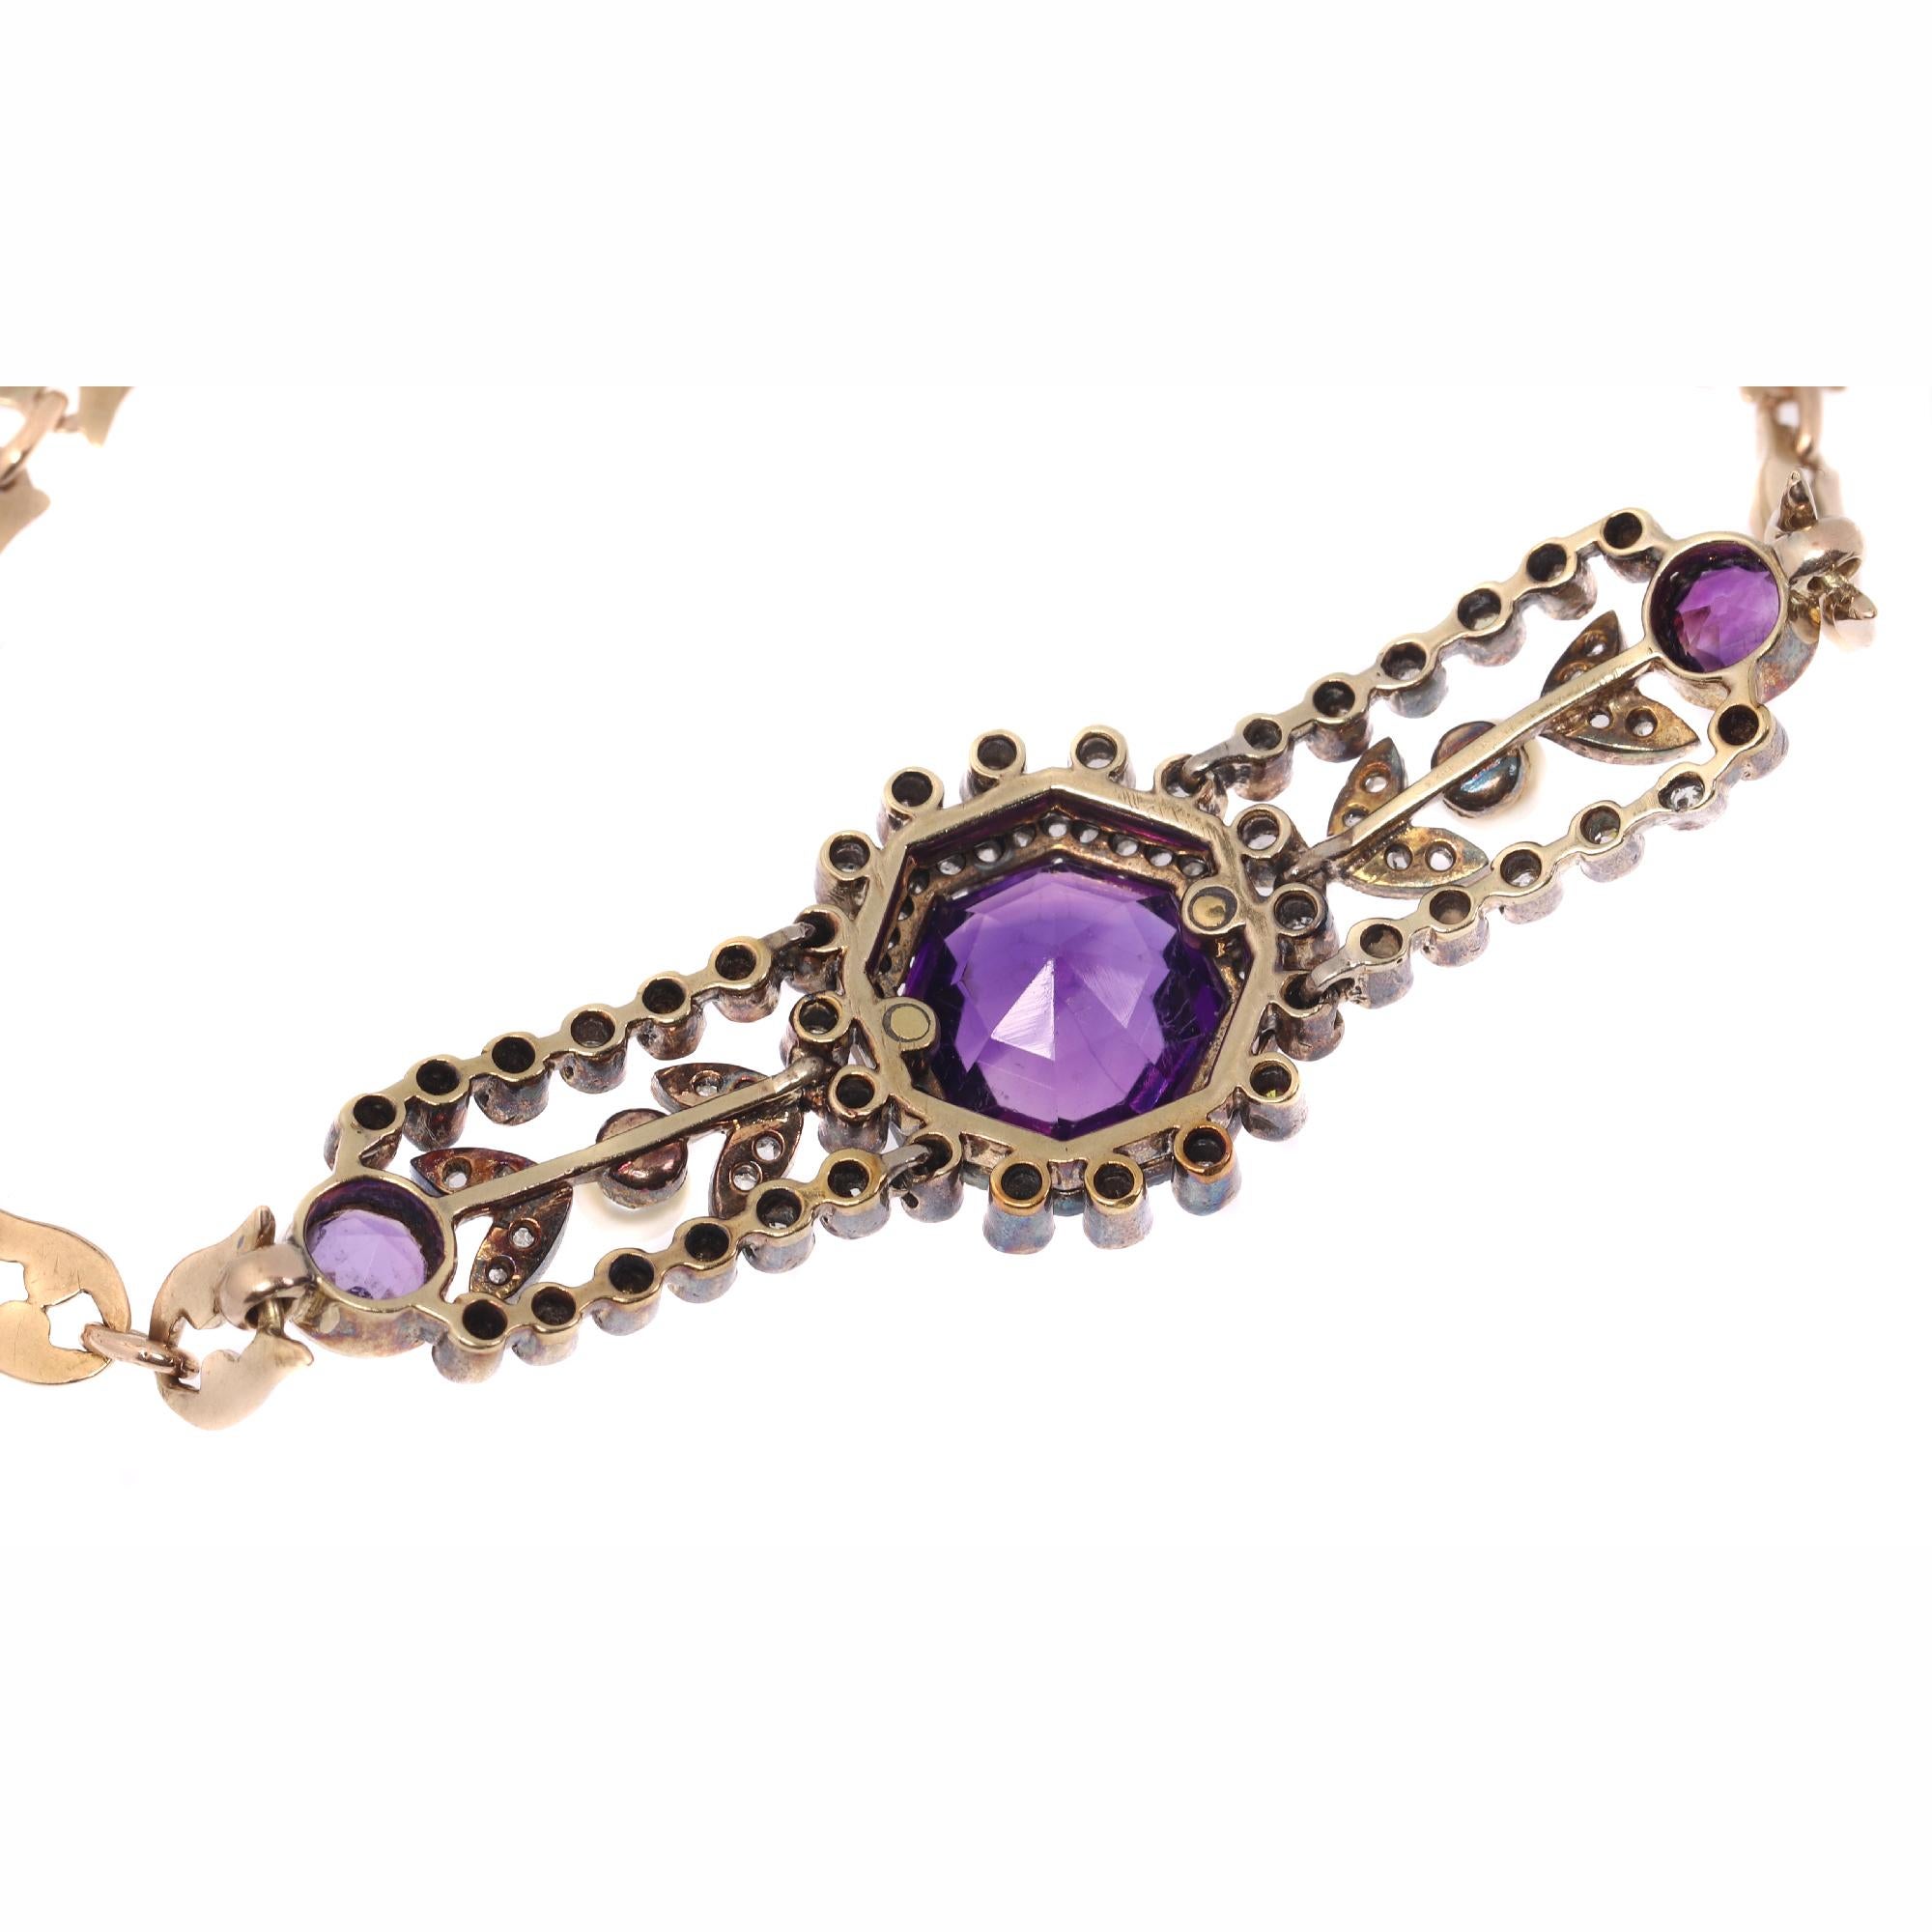 Women's Charm Antique Gold Bracelet with Amethyst Diamonds and Pearls, 1860s For Sale